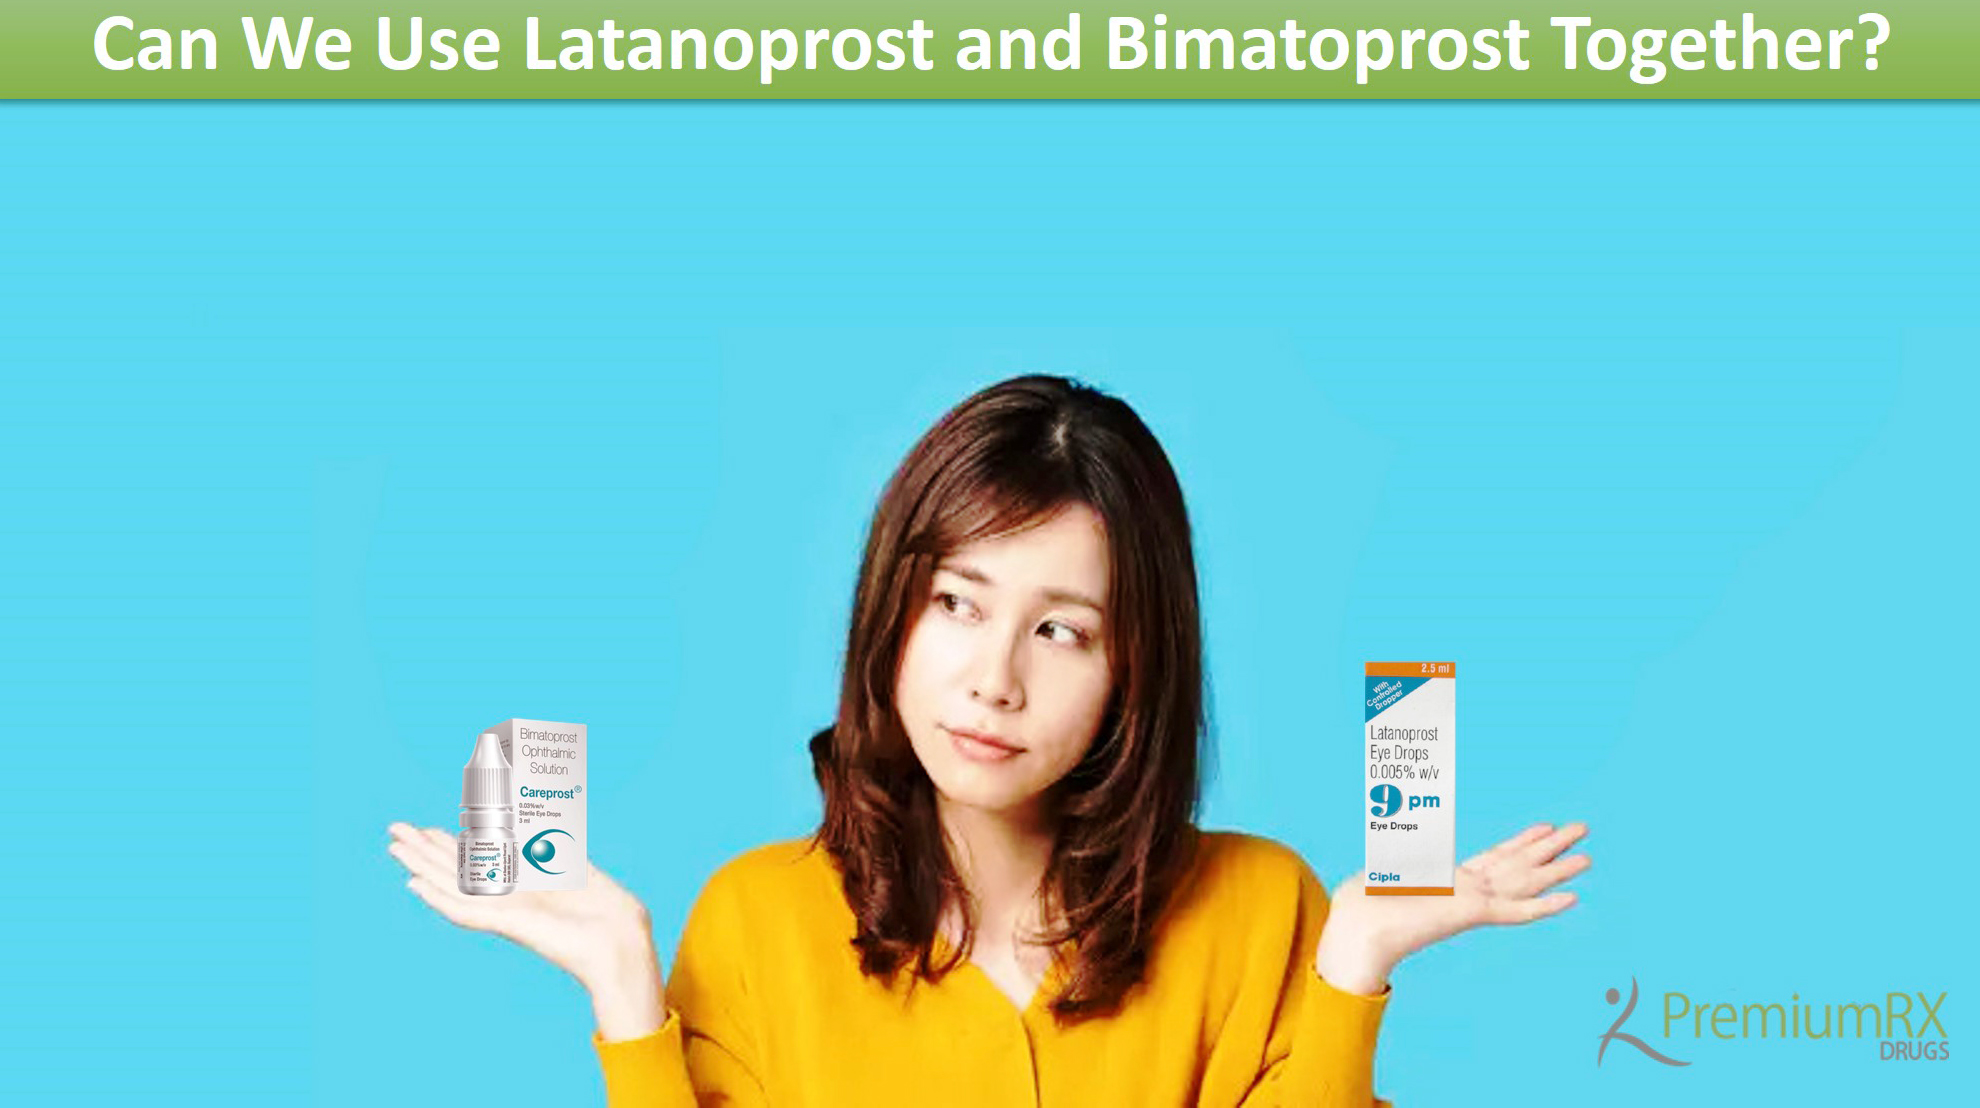 Can We Use Latanoprost and Bimatoprost Together?